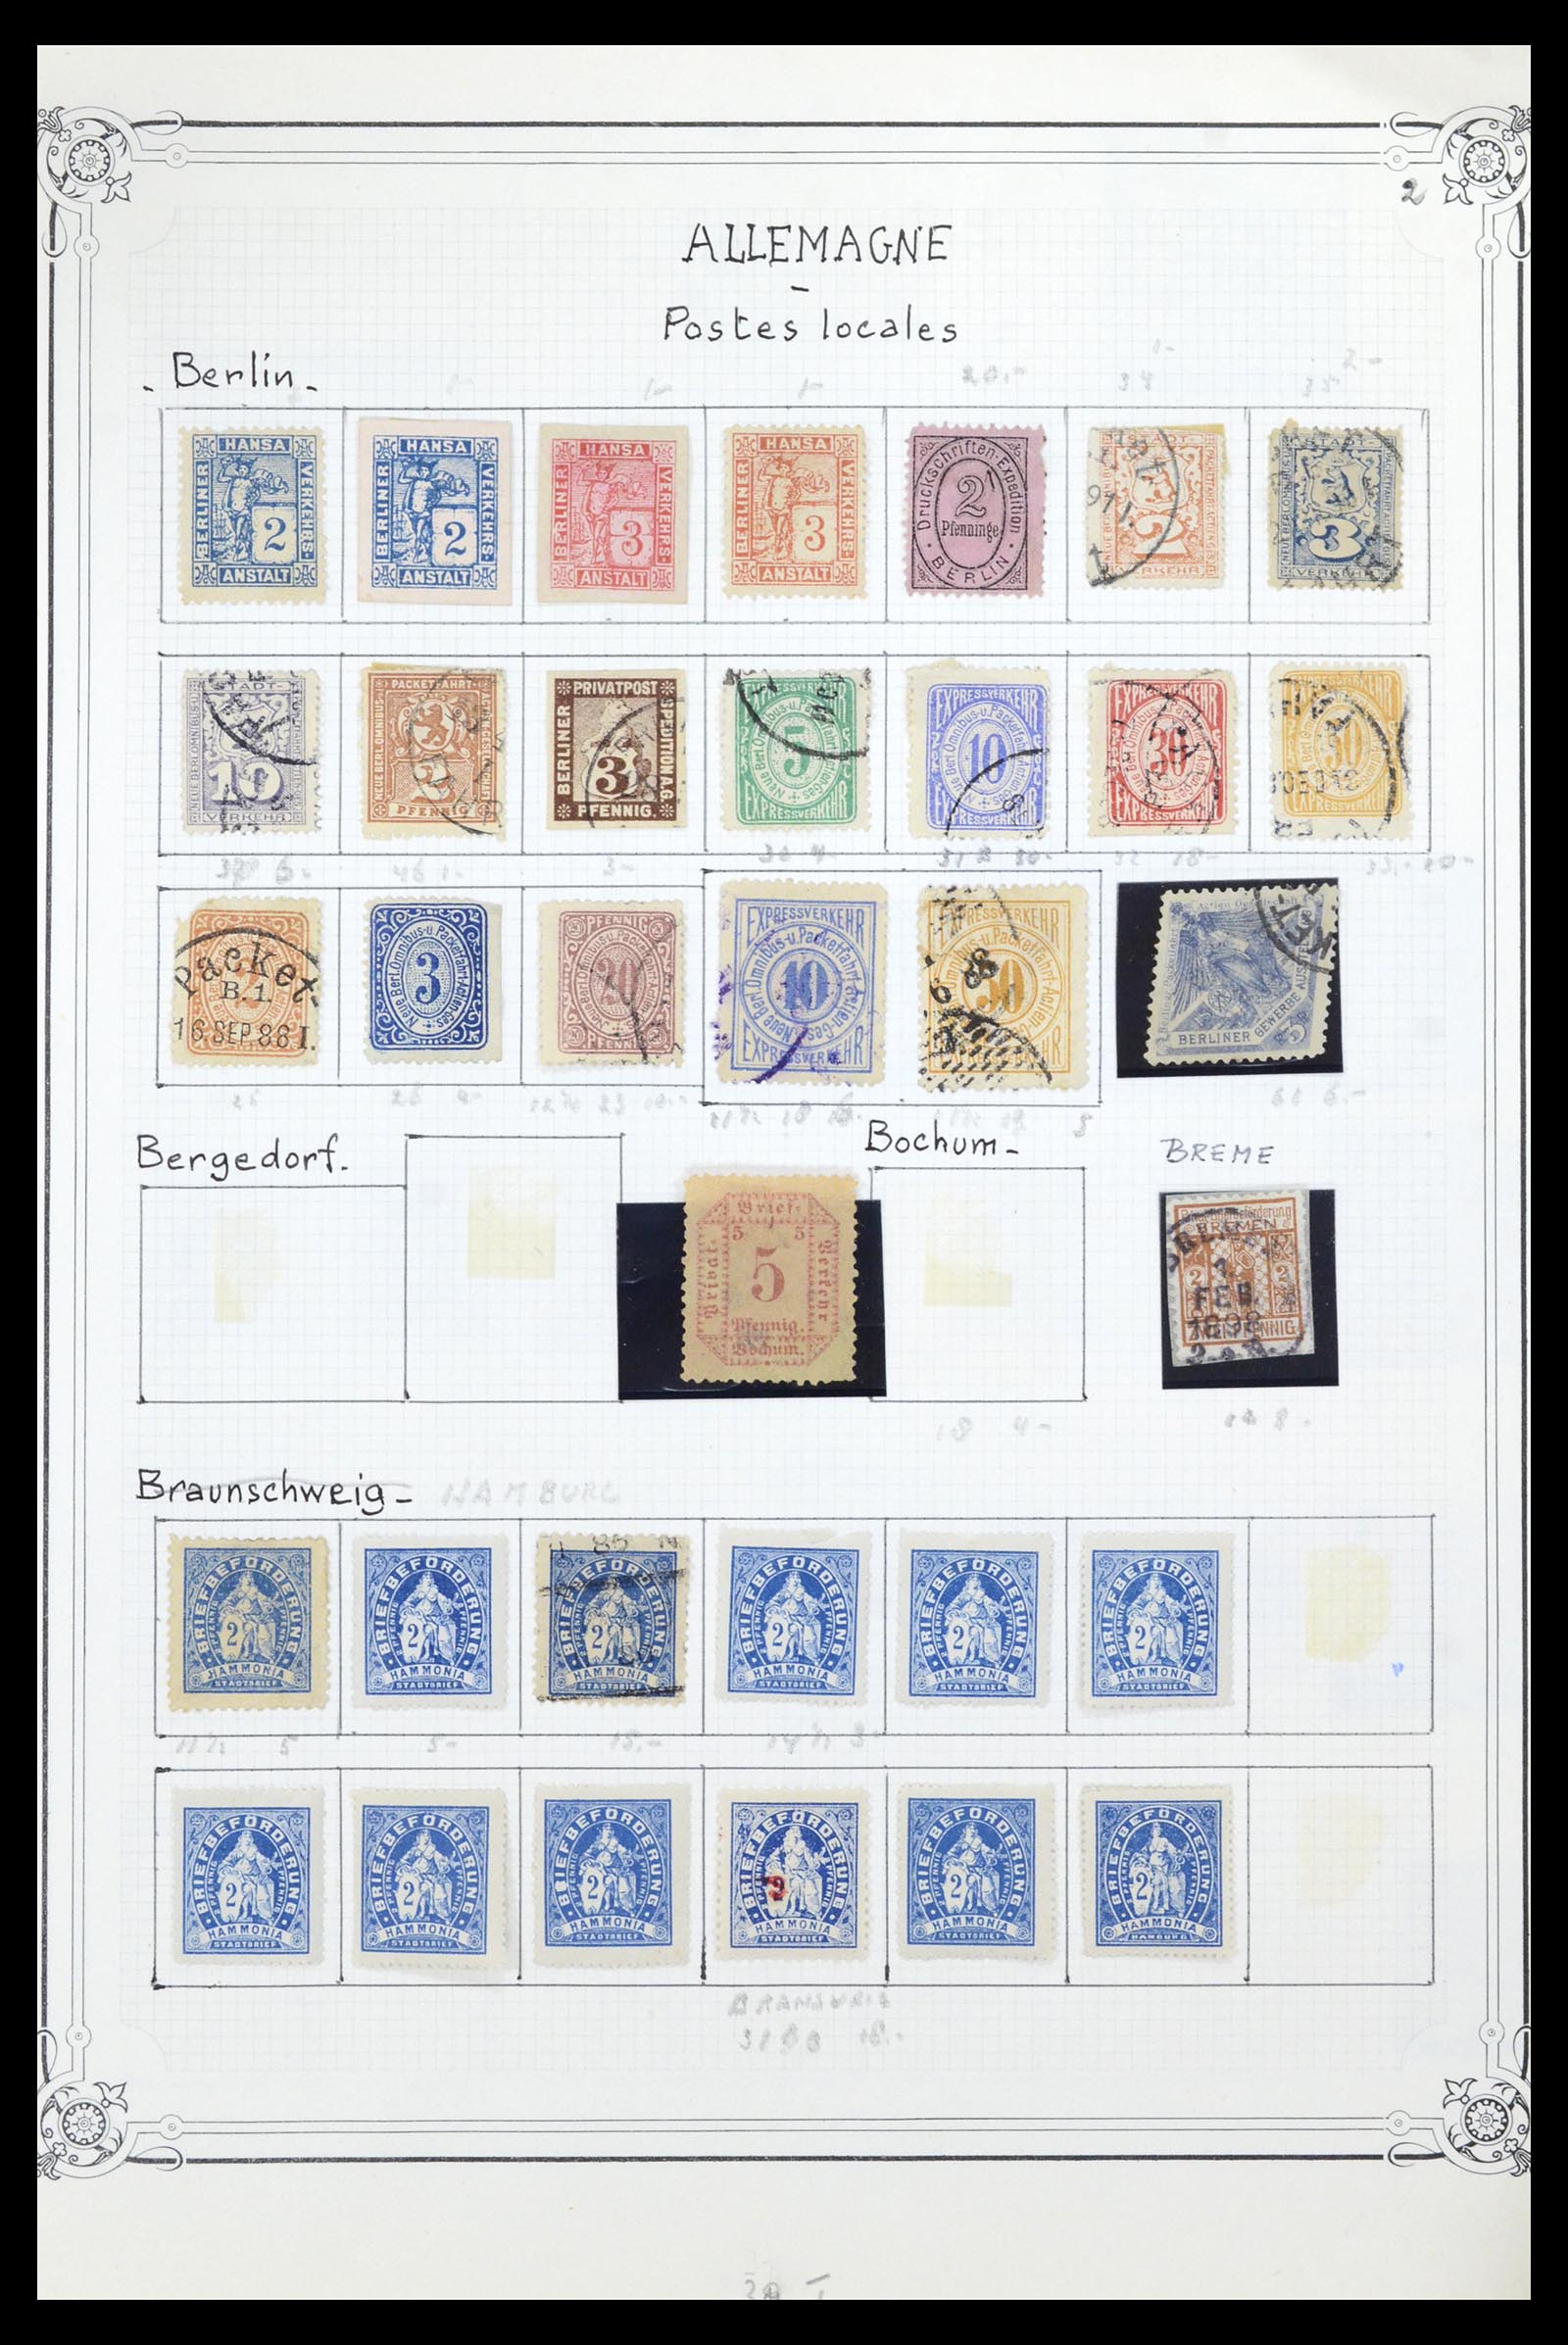 36972 002 - Stamp collection 36972 Germany local post 1880-1900.